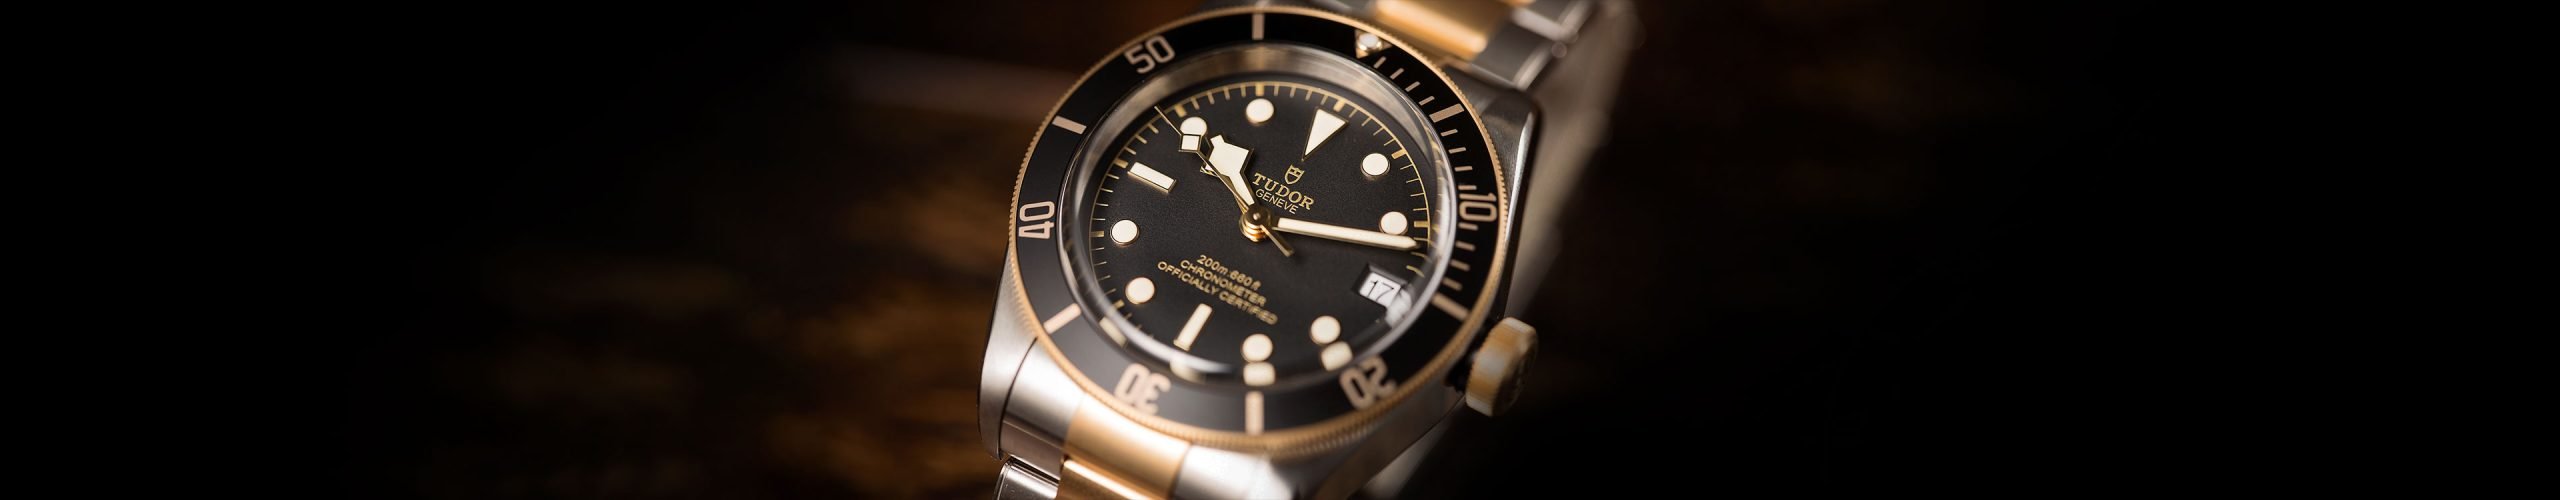 Tudor-Watches-Buying-Guide